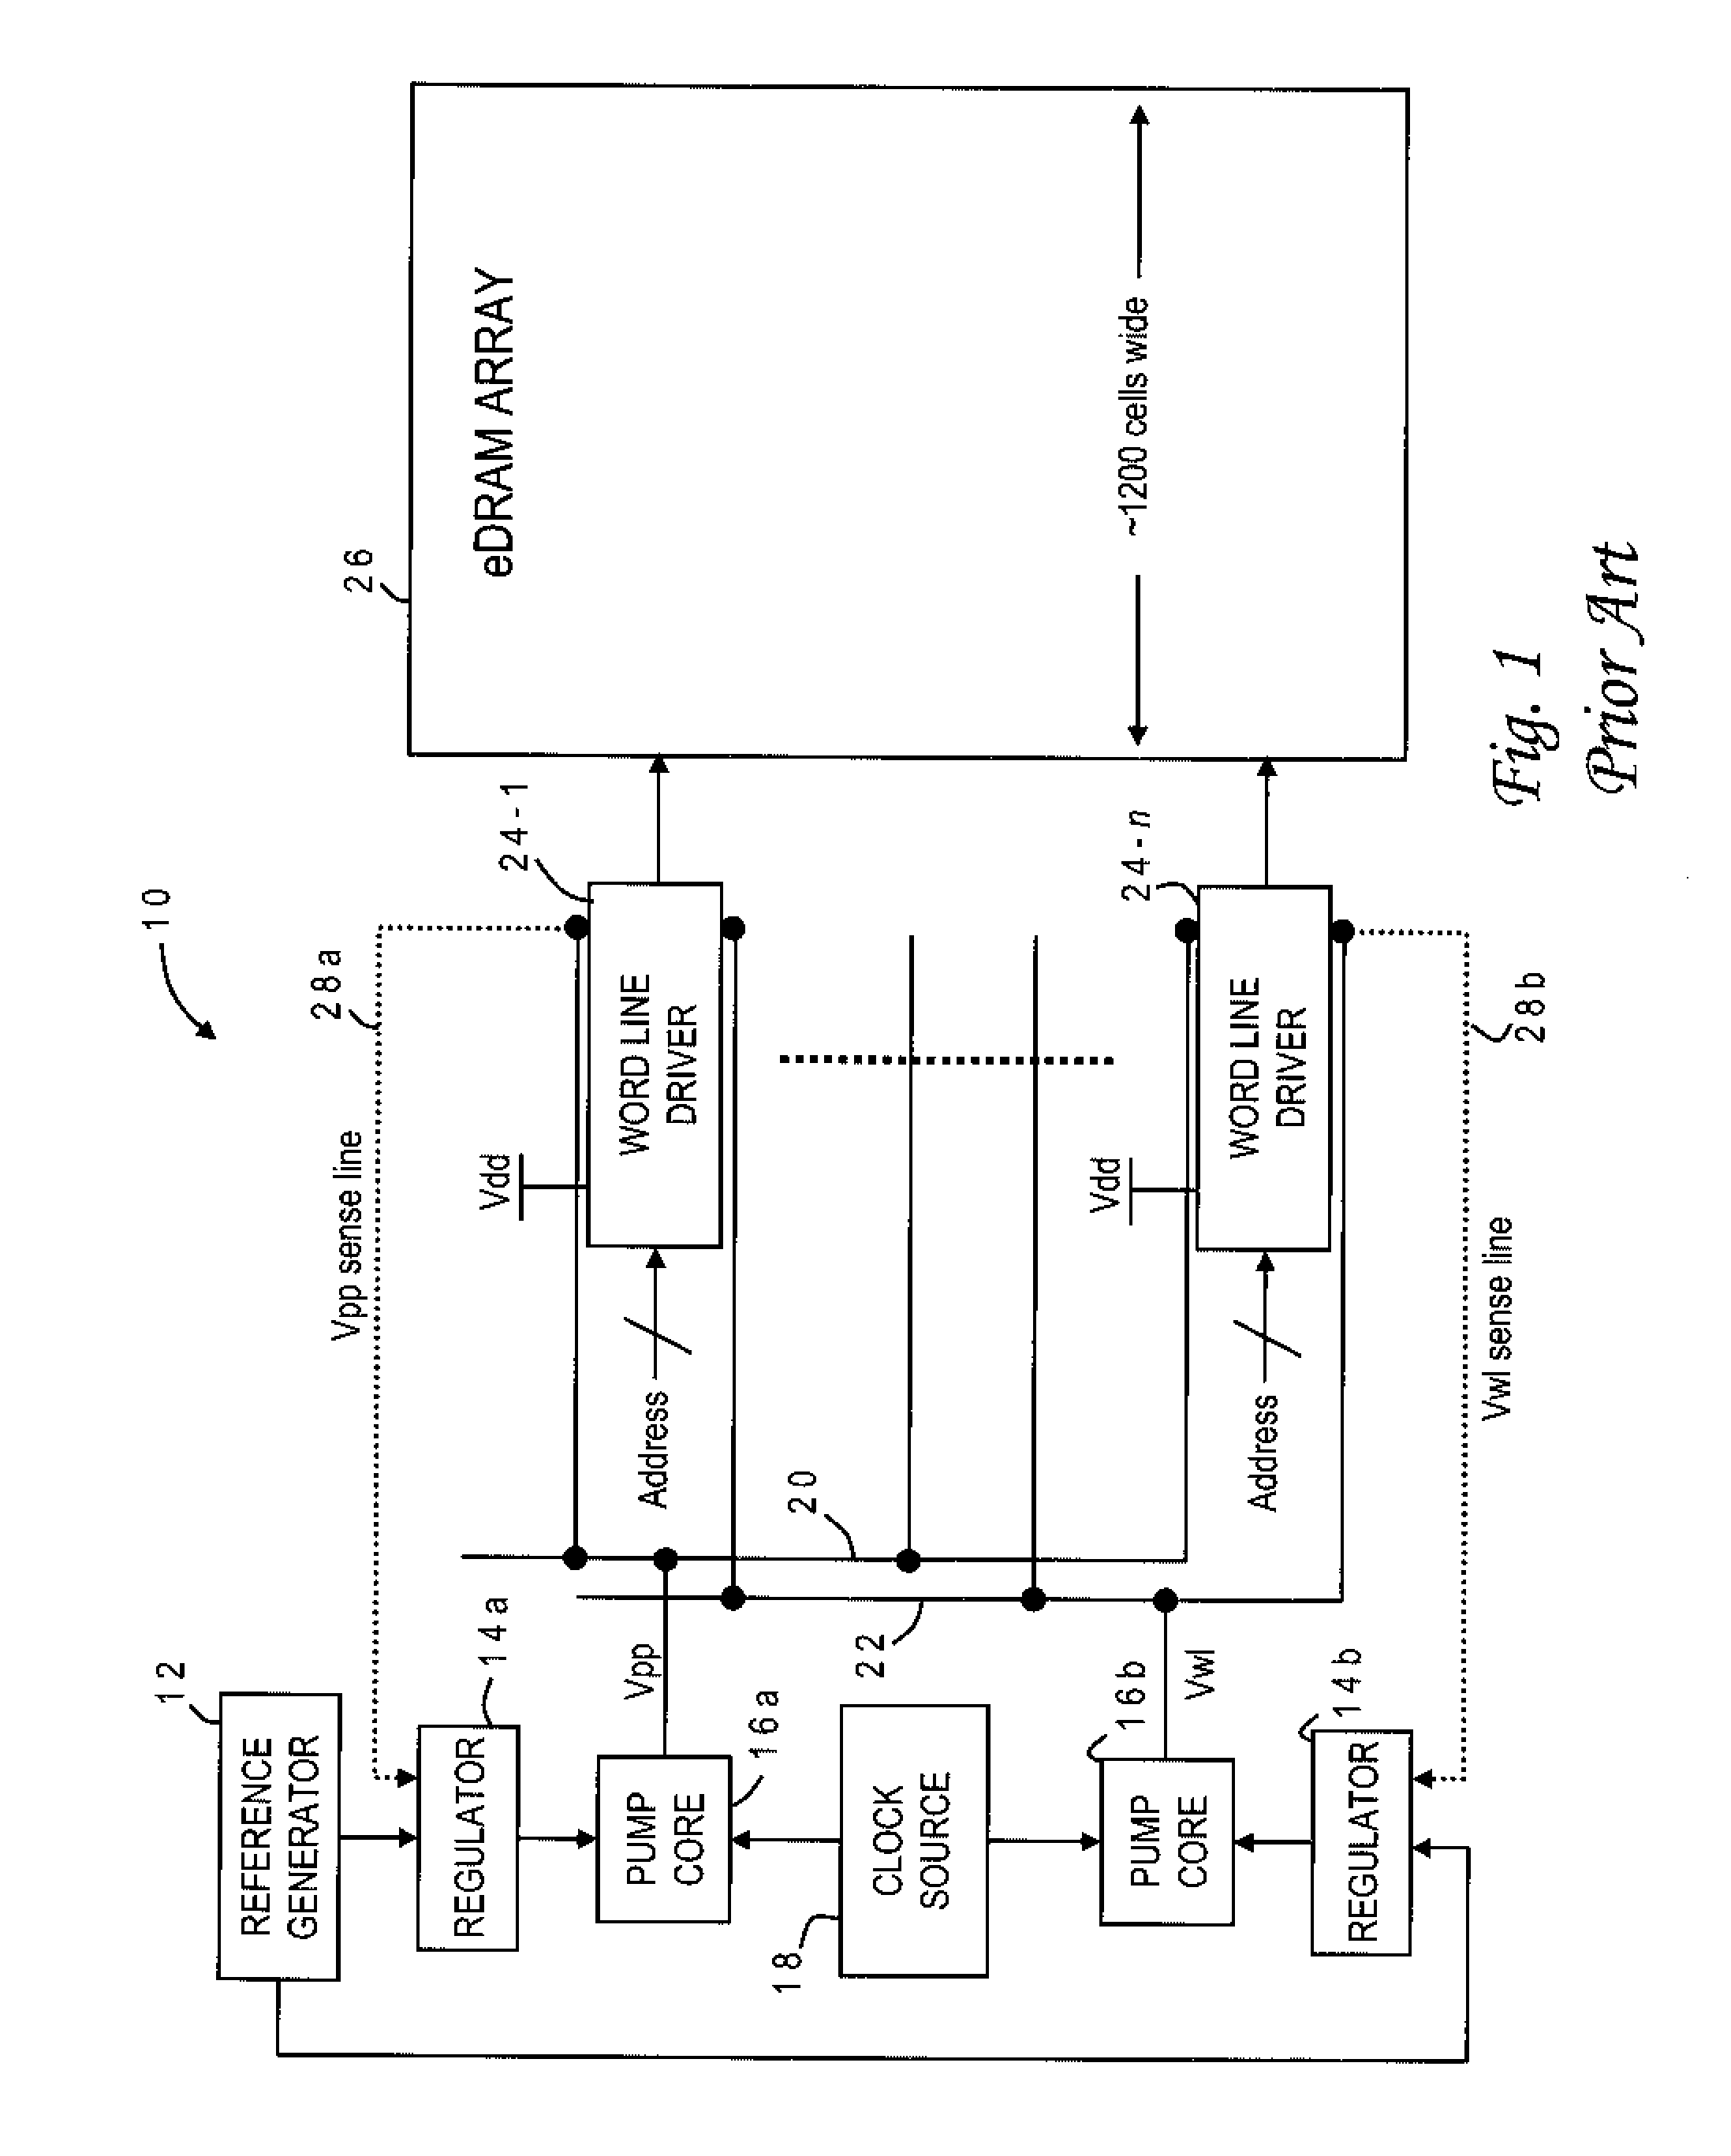 Peak Power Reduction Methods in Distributed Charge Pump Systems